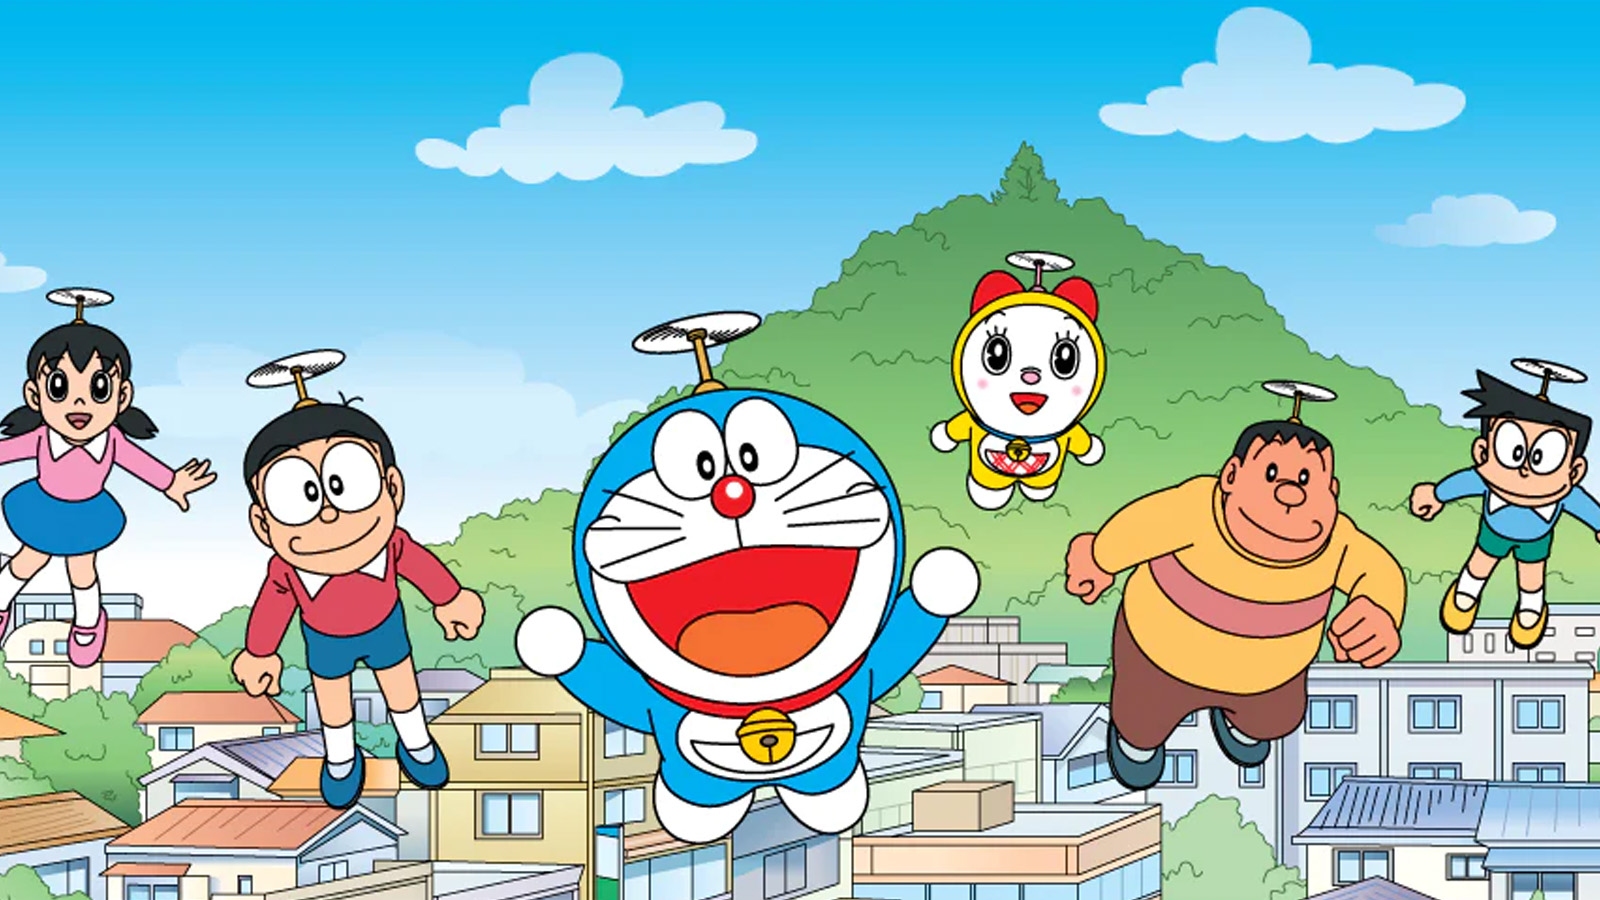 My Favourite Anime - Doraemon - by R Dhathri - All Smart Articles